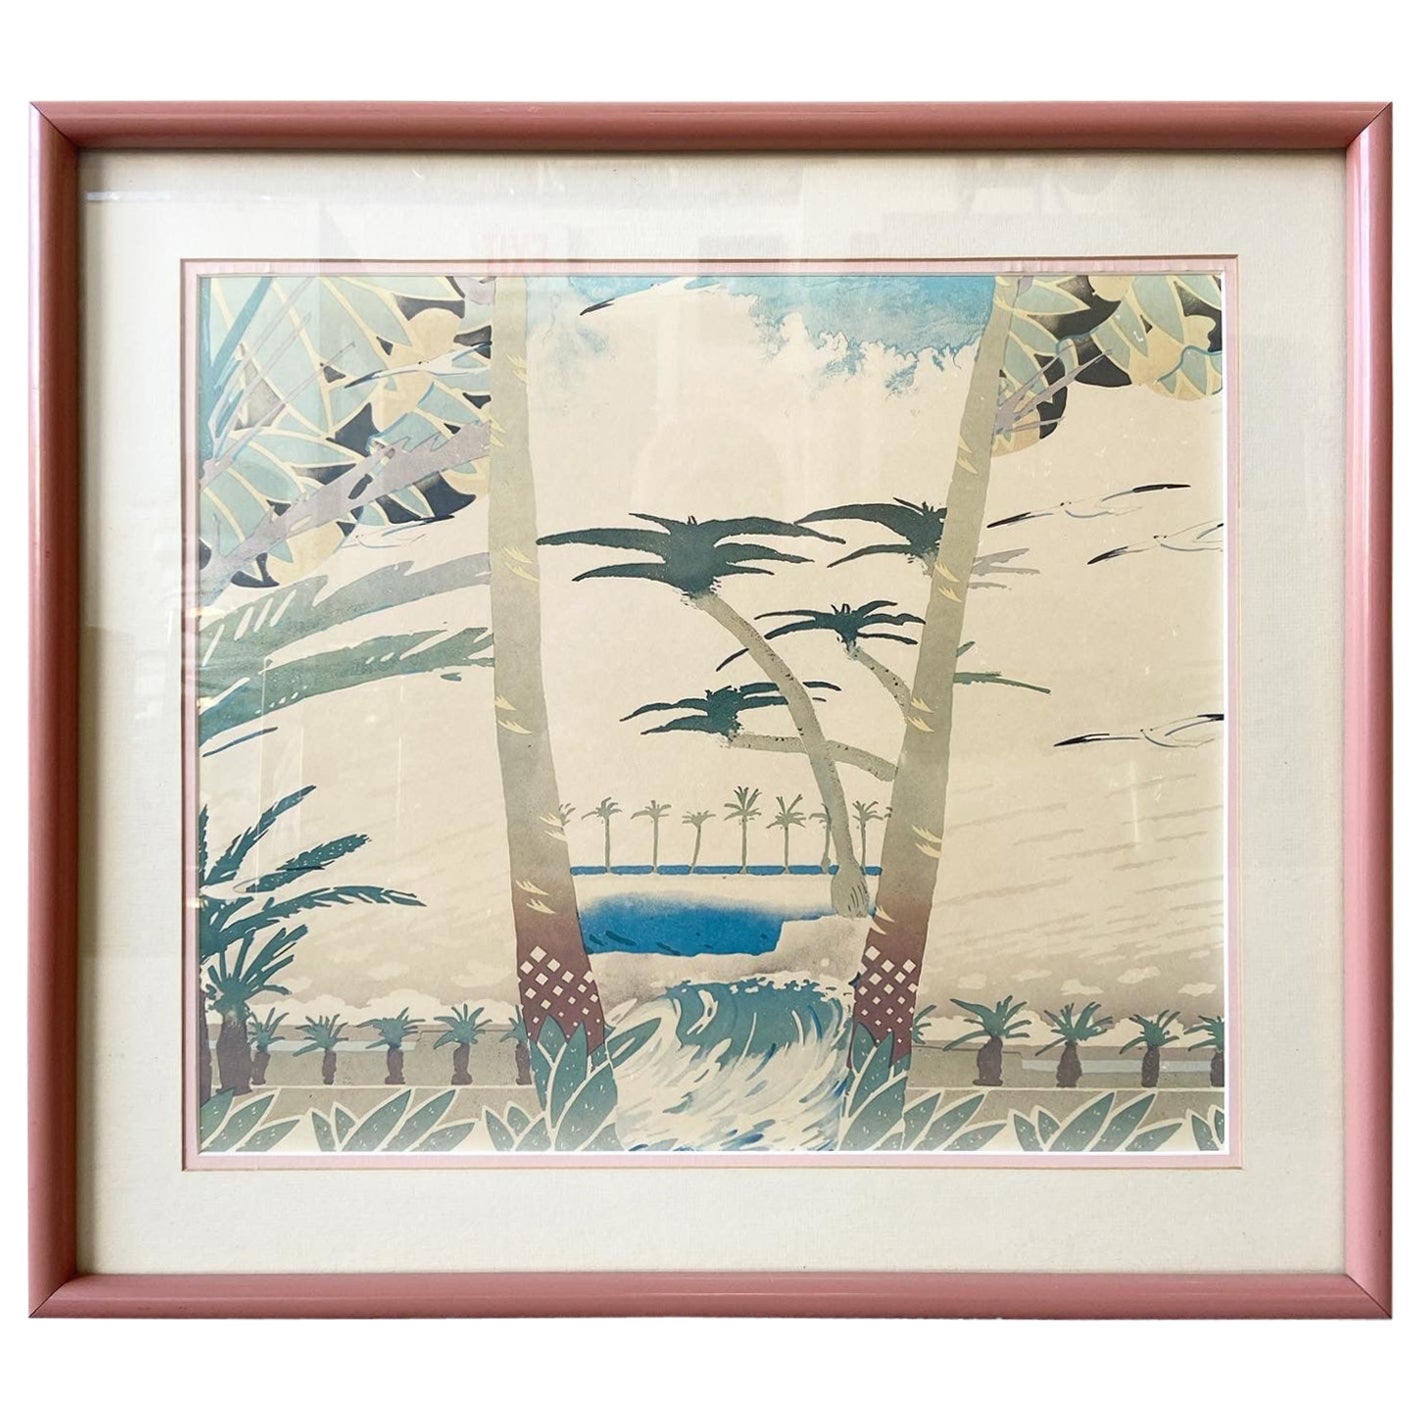 Waves & Palm Trees Art Print Framed in Pink